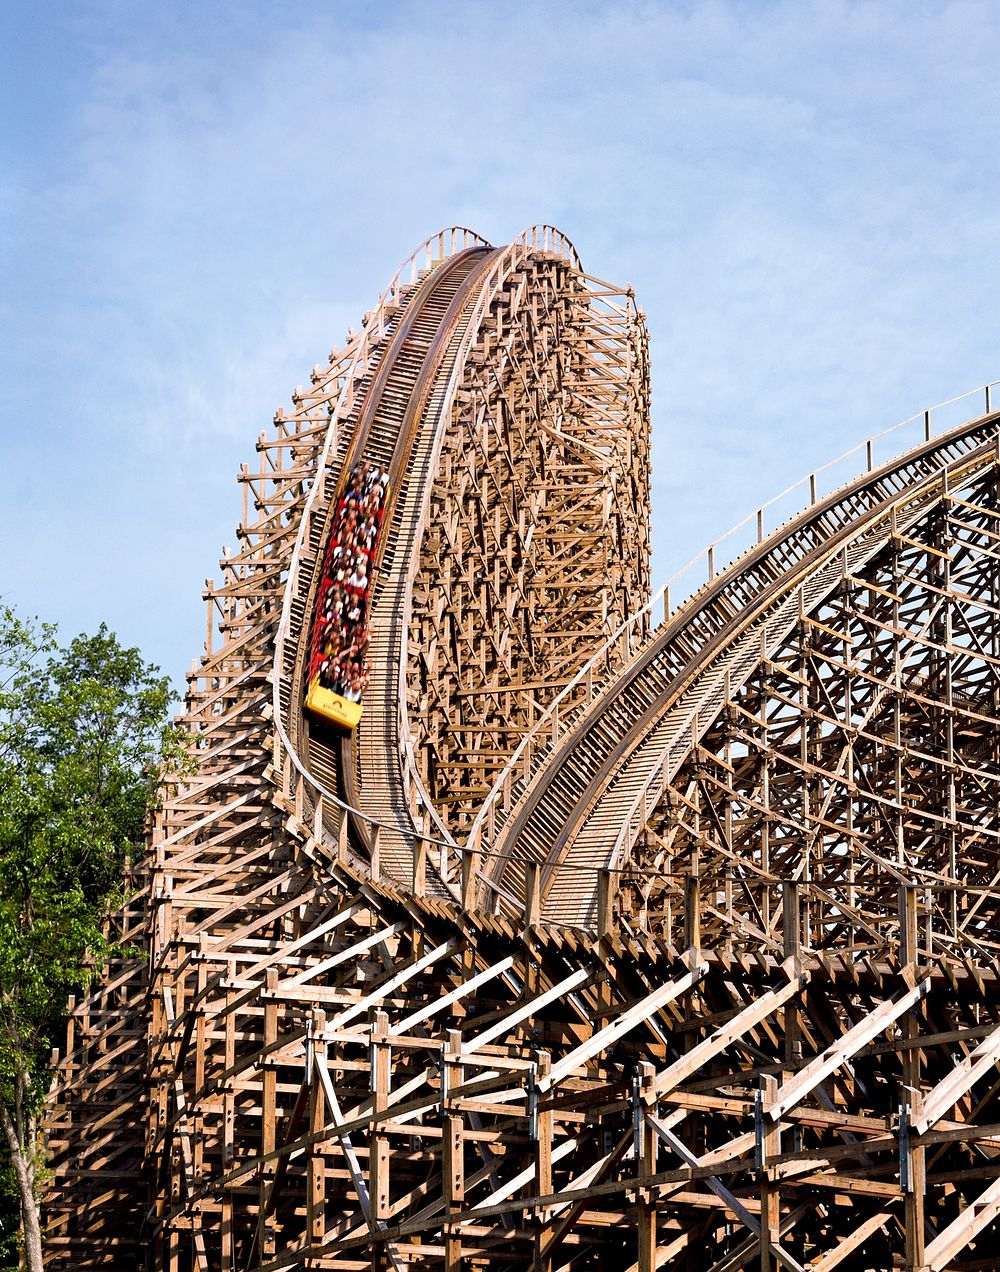 Son of Beast roller coaster at King's Island amusement park in Ohio. Original image from Carol M. Highsmith&rsquo;s America…